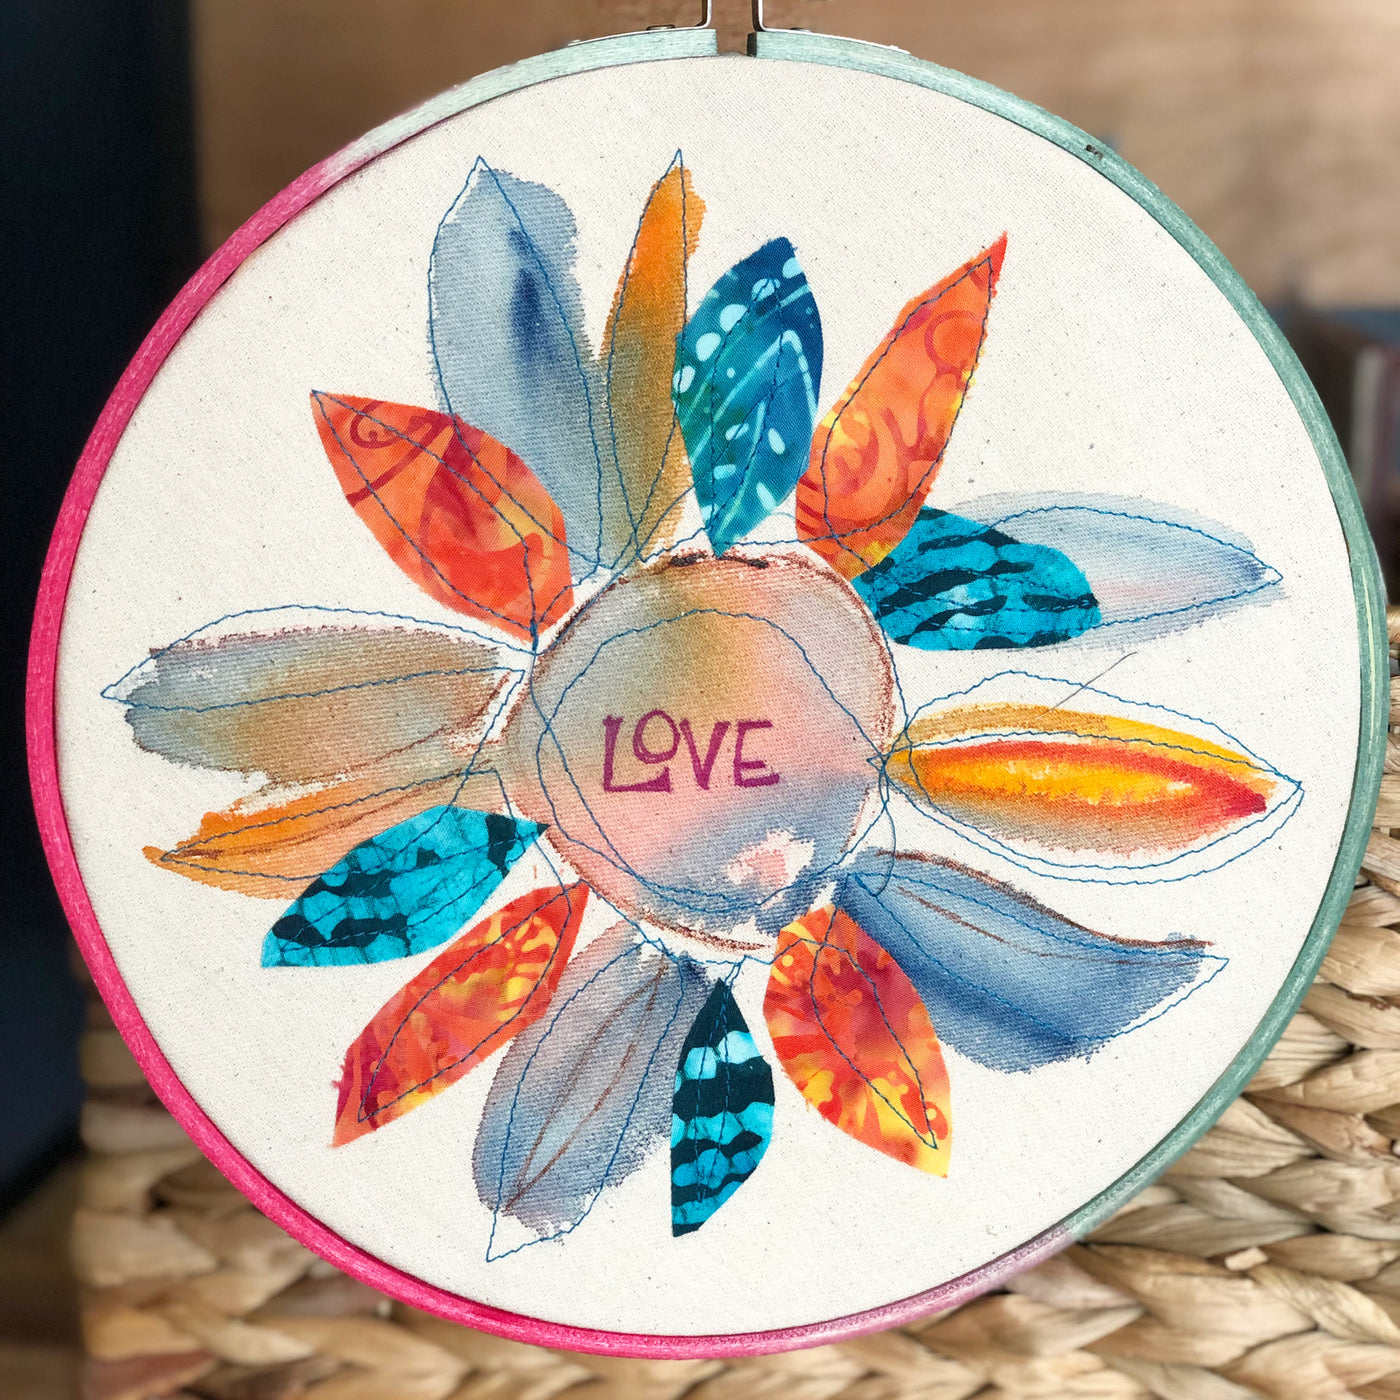 round dyed wooden hoop art, with painted and stitched fabric leaves in colors of blue and orange and yellow, with the word 'love' painted in the center